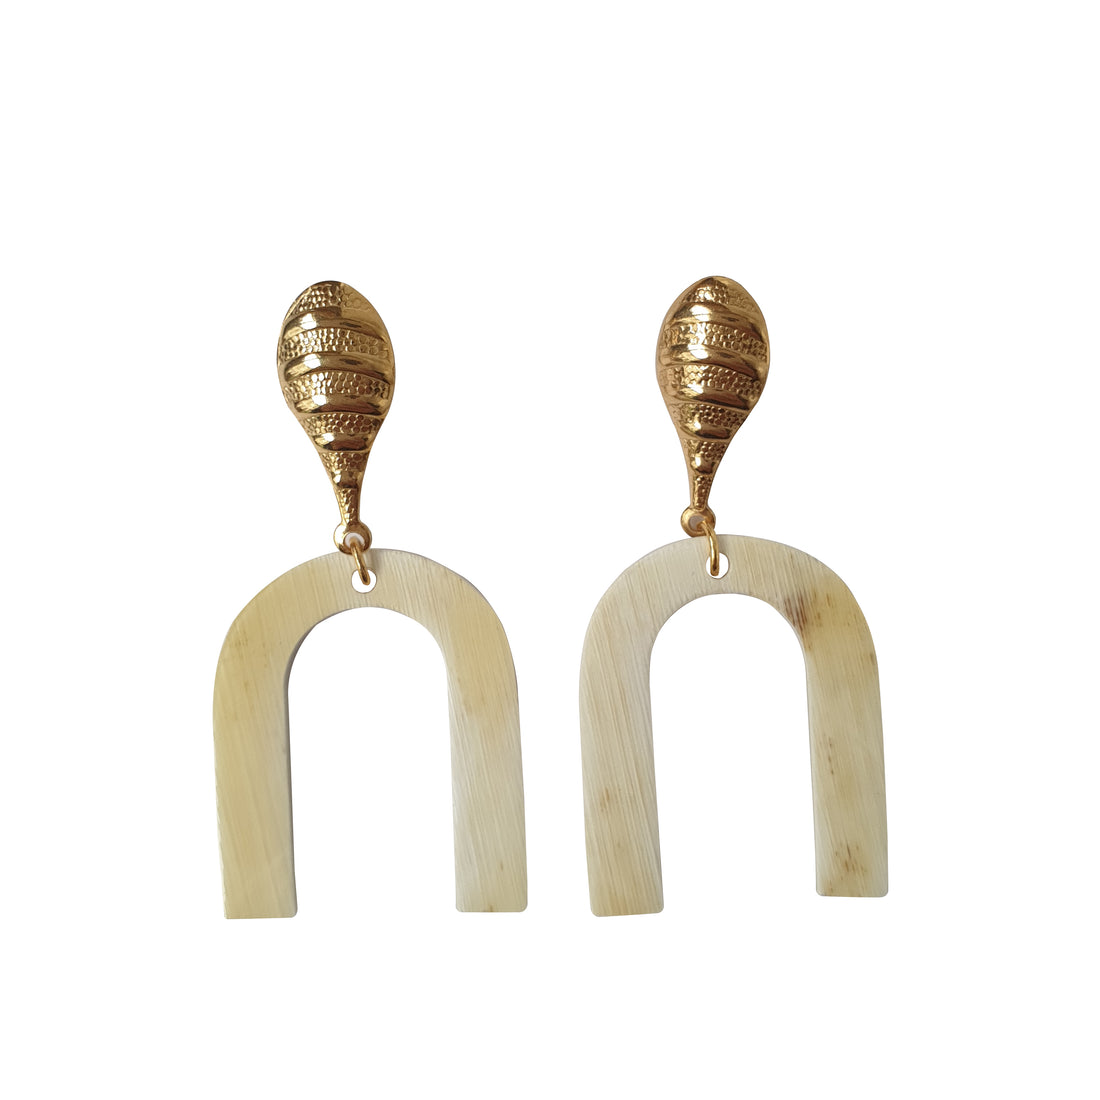 Gold luxury drop earrings are handmade with "H" shape and white color on a white background